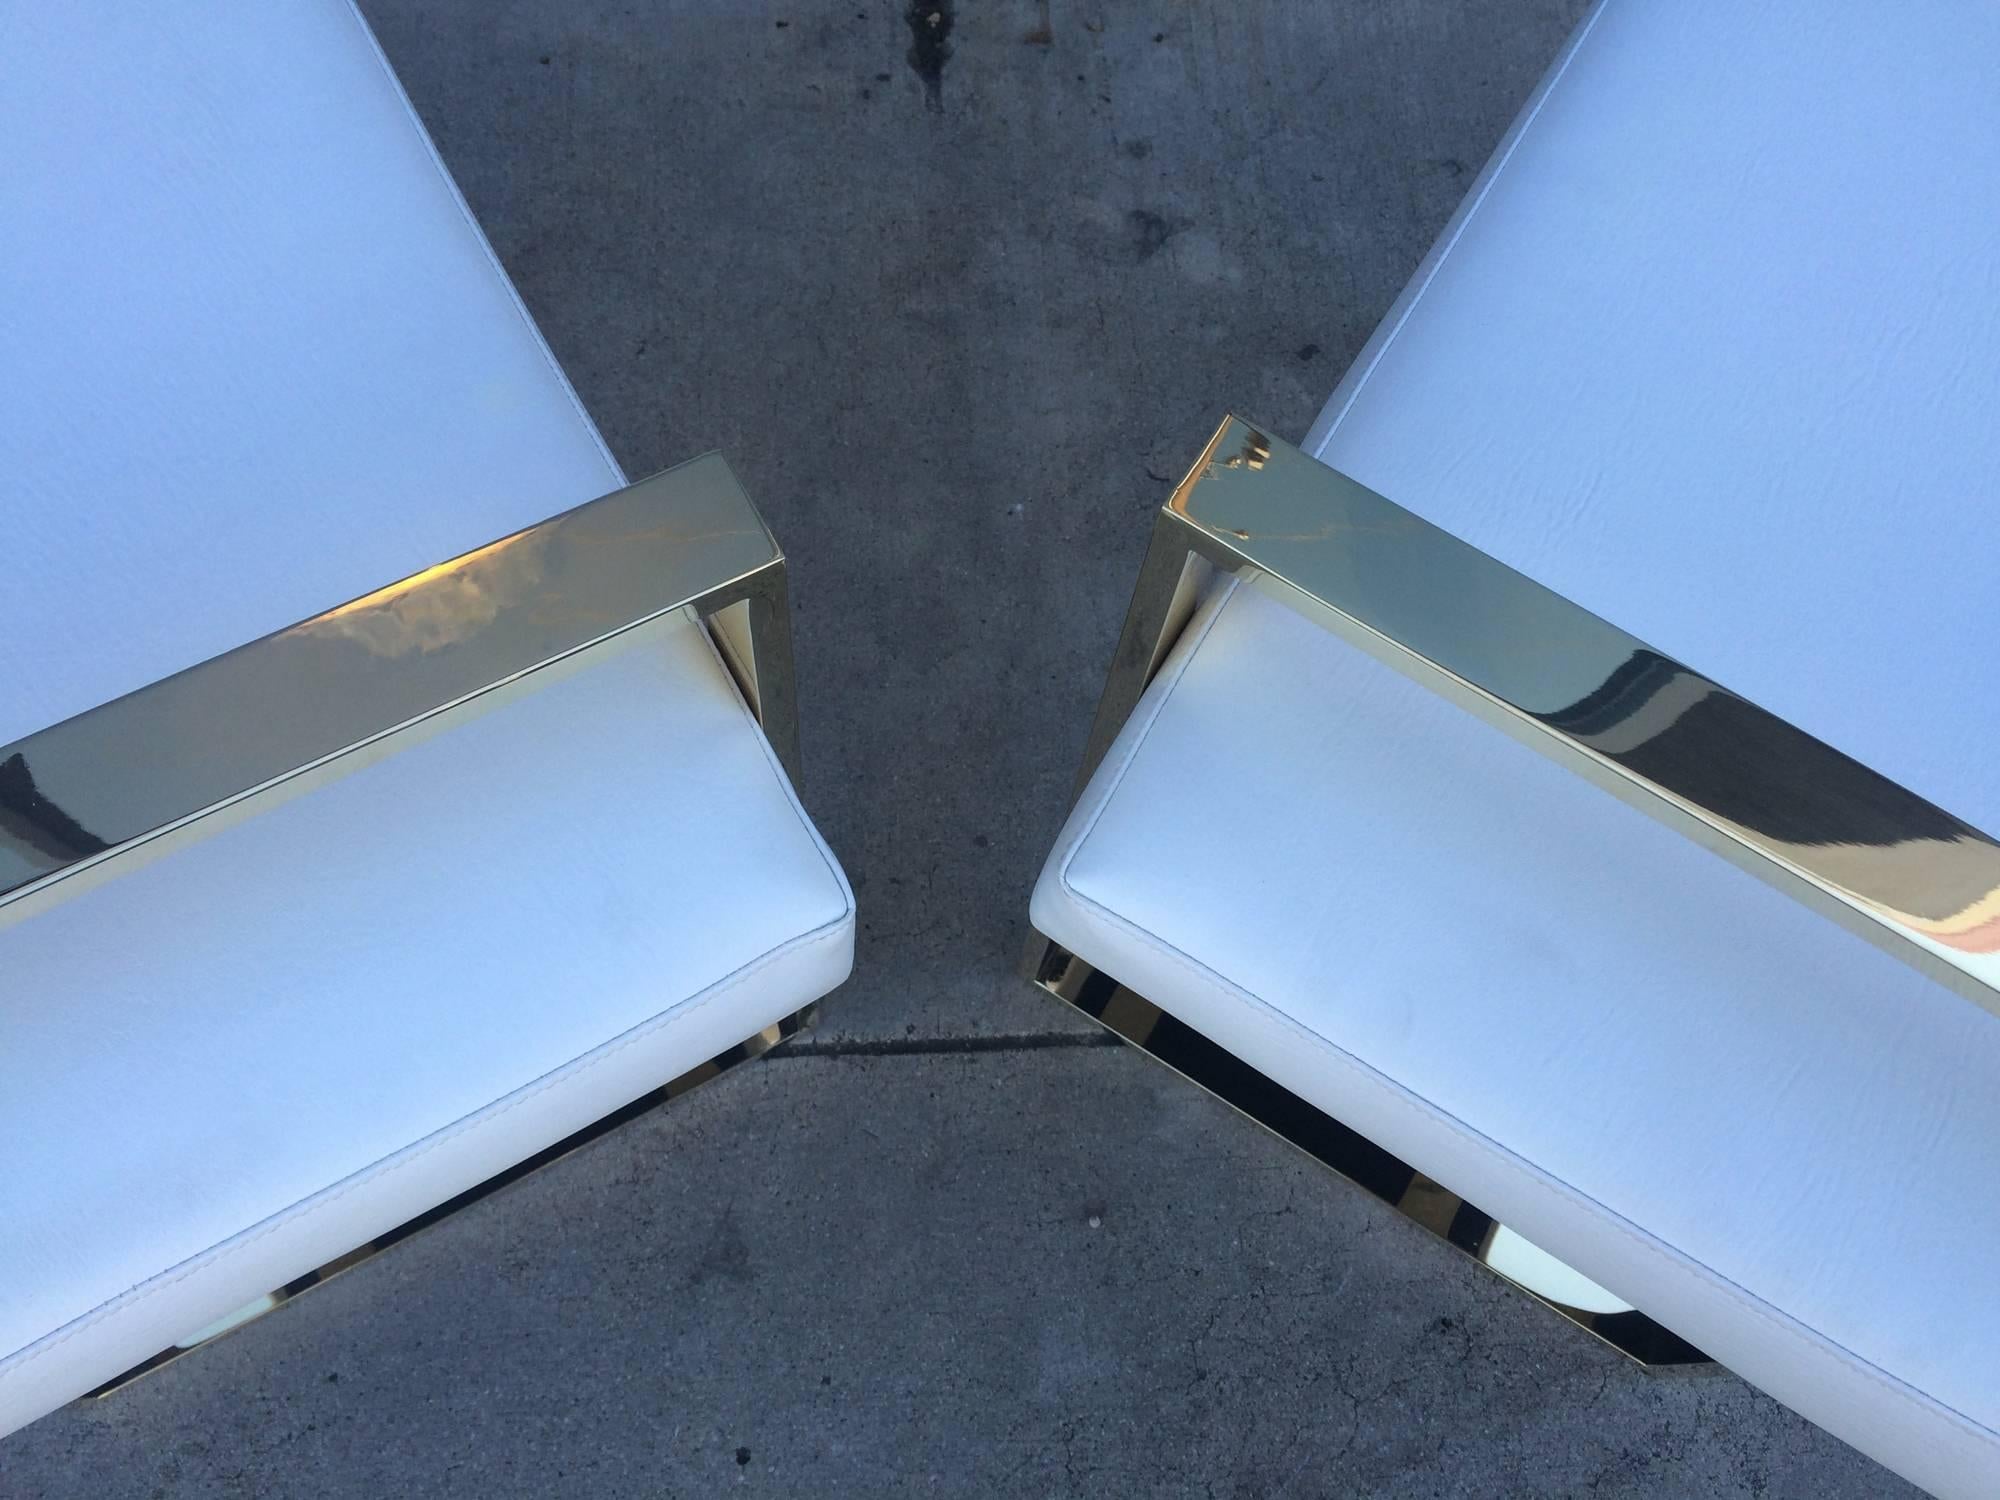 Pair of solid polished brass benches designed and manufactured by Charles Hollis Jones in the 1970s.

The frames of the benches are made in solid brass, they are upholstered in white Naugahyde but they are also available in other finishes such as